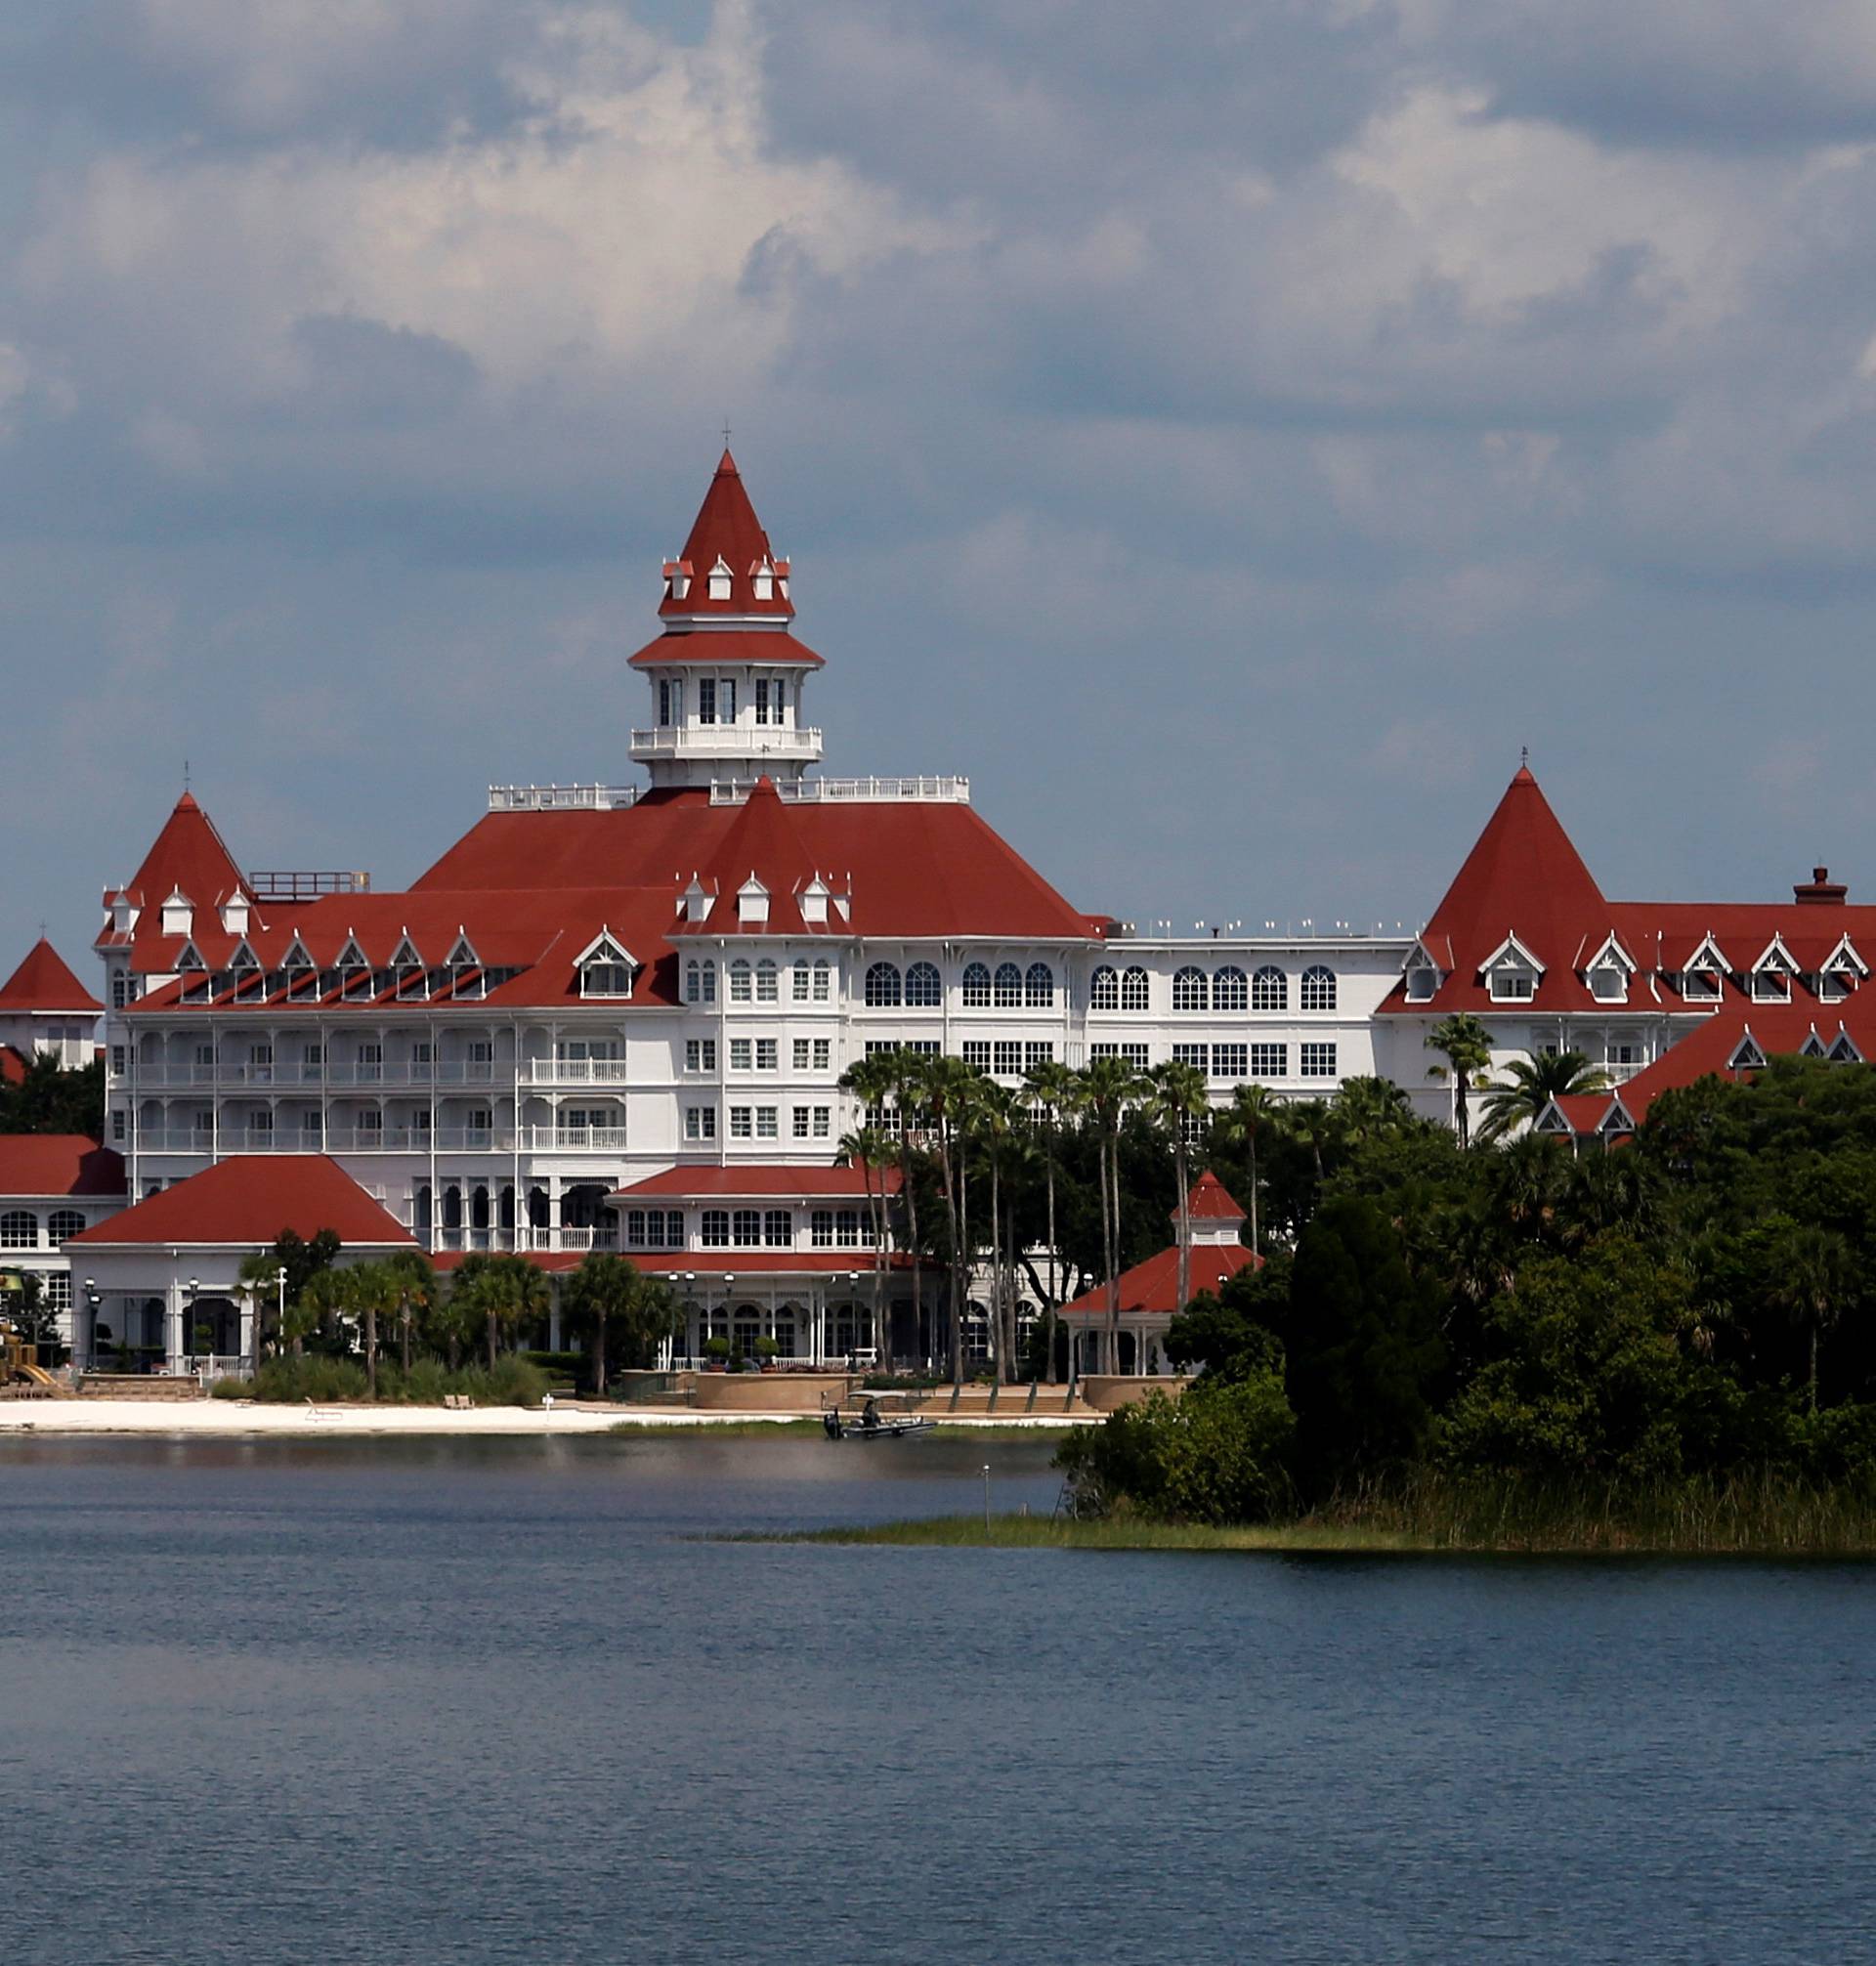 The Grand Floridian is photographed at the Walt Disney World resort in Orlando, Florida, U.S.